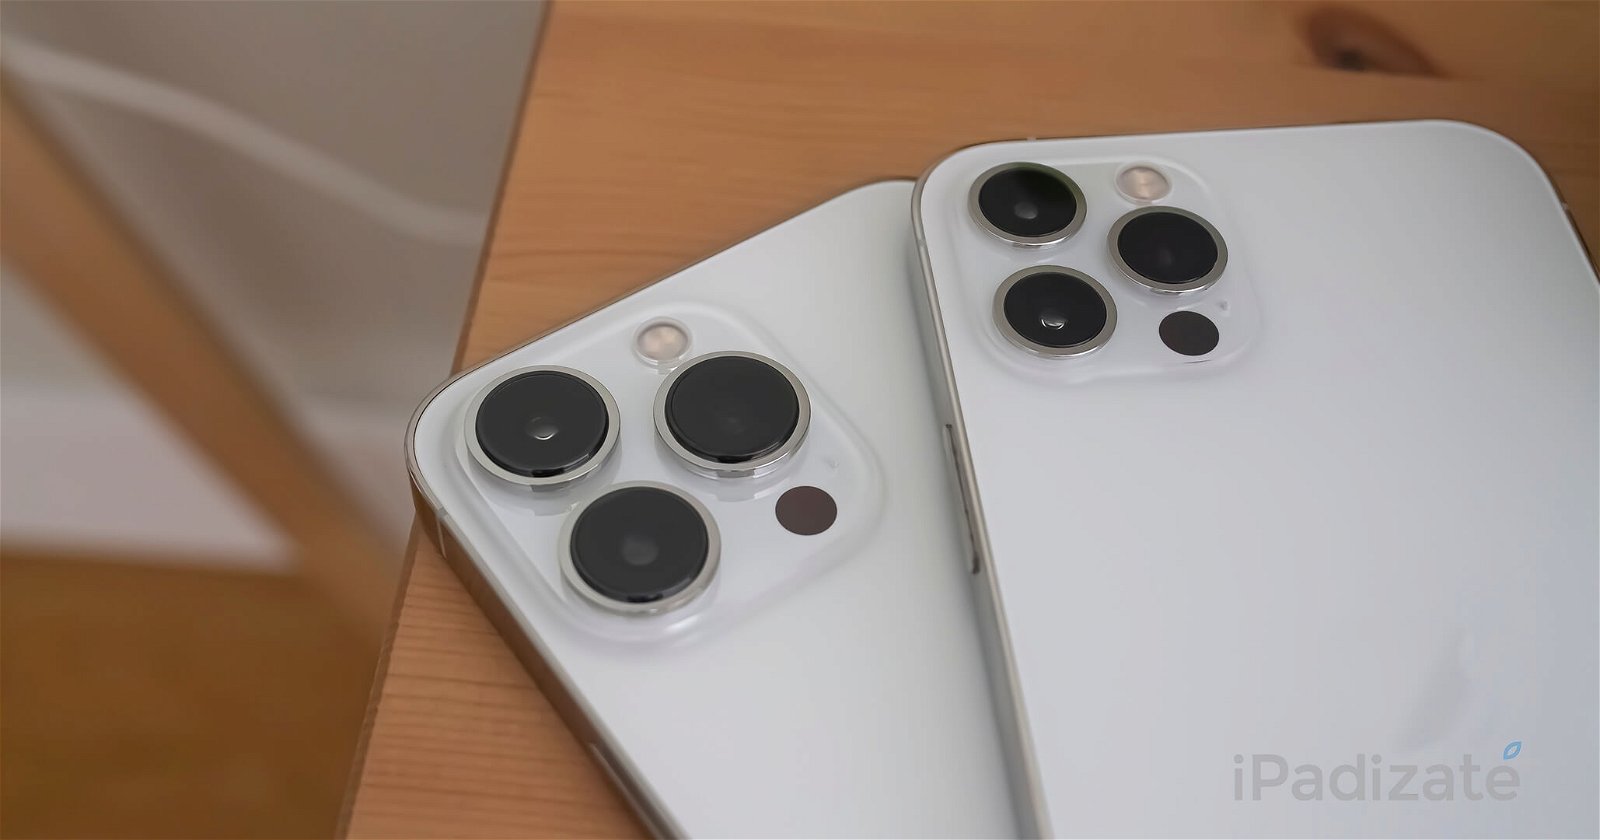 IPhone 13 Pro and iPhone 13 Pro cameras